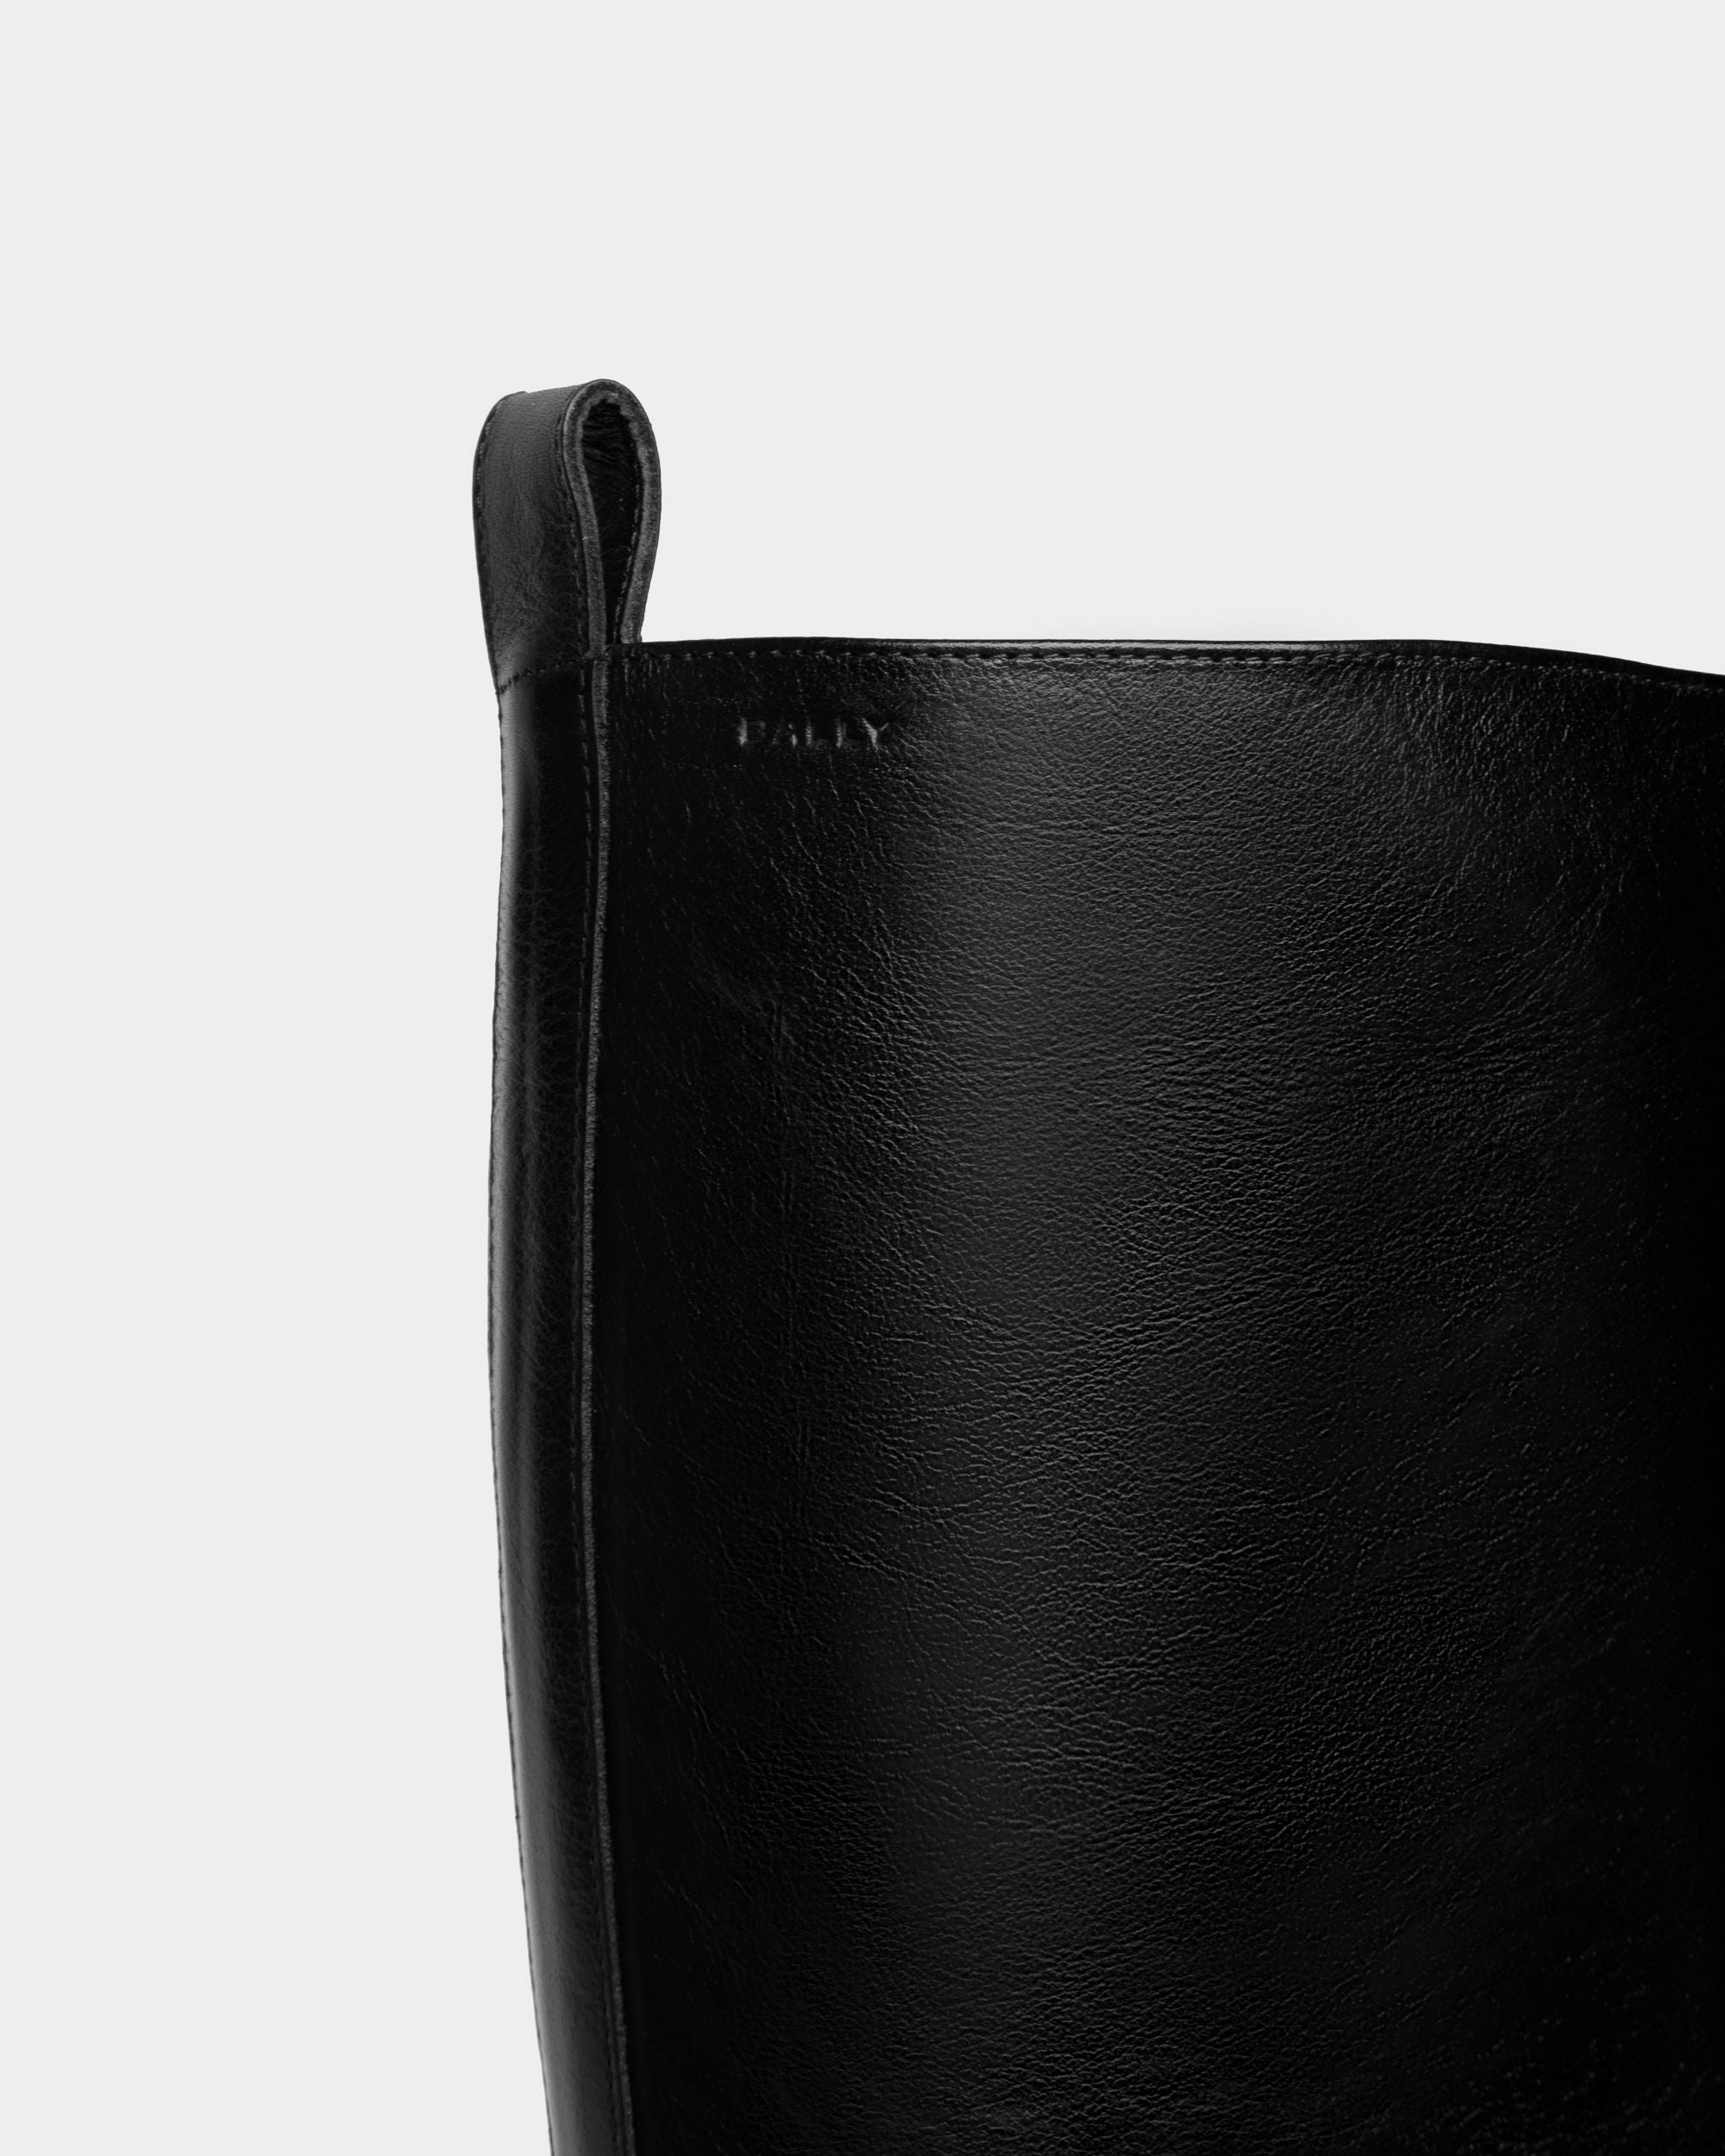 Peggy | Women's Boot in Black Leather | Bally | Still Life Detail